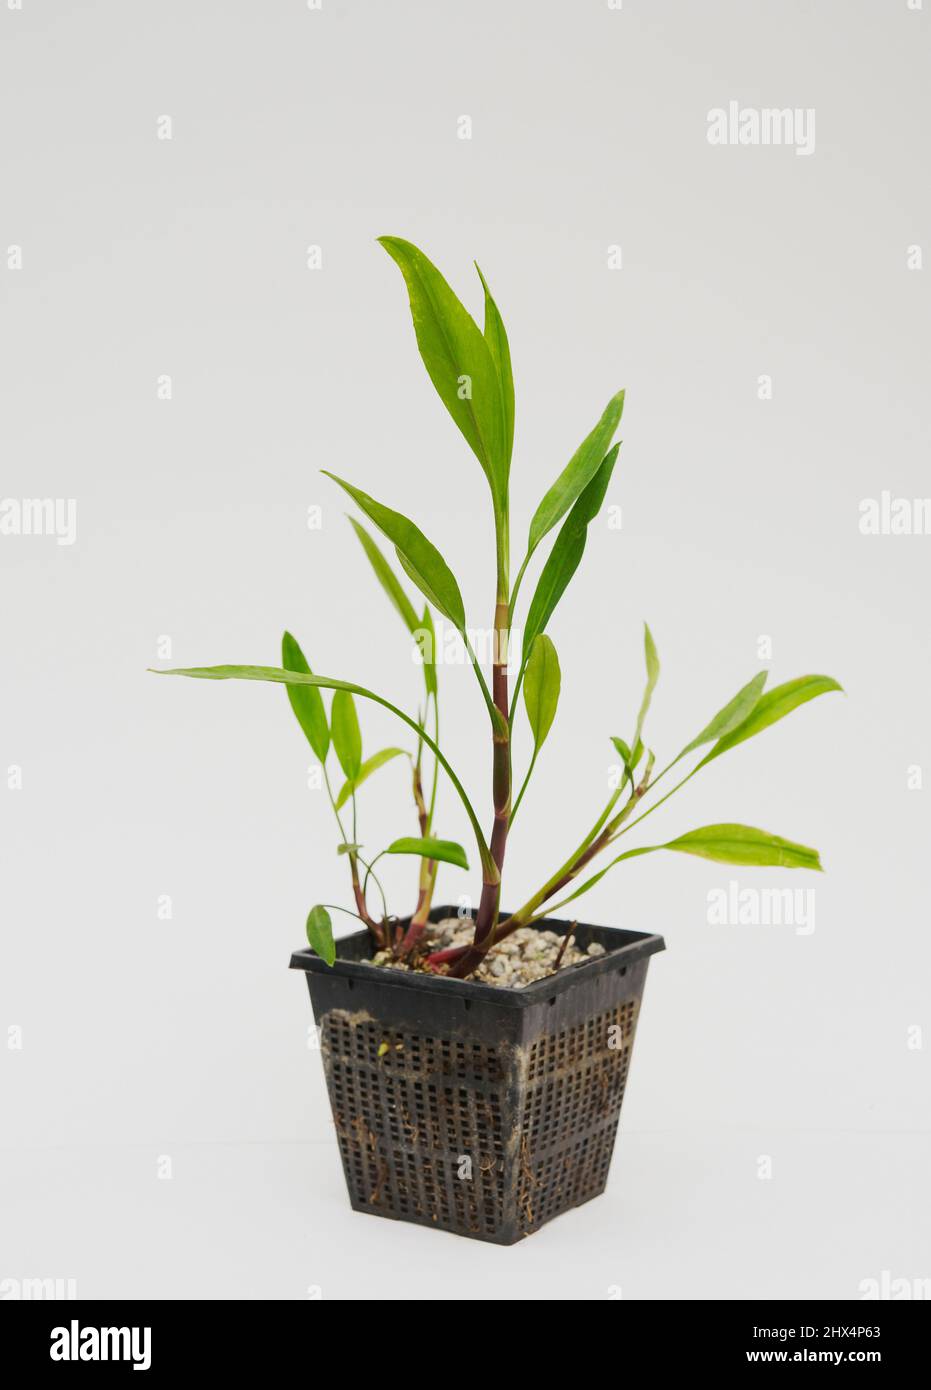 Grow container pond great spearwort Stock Photo